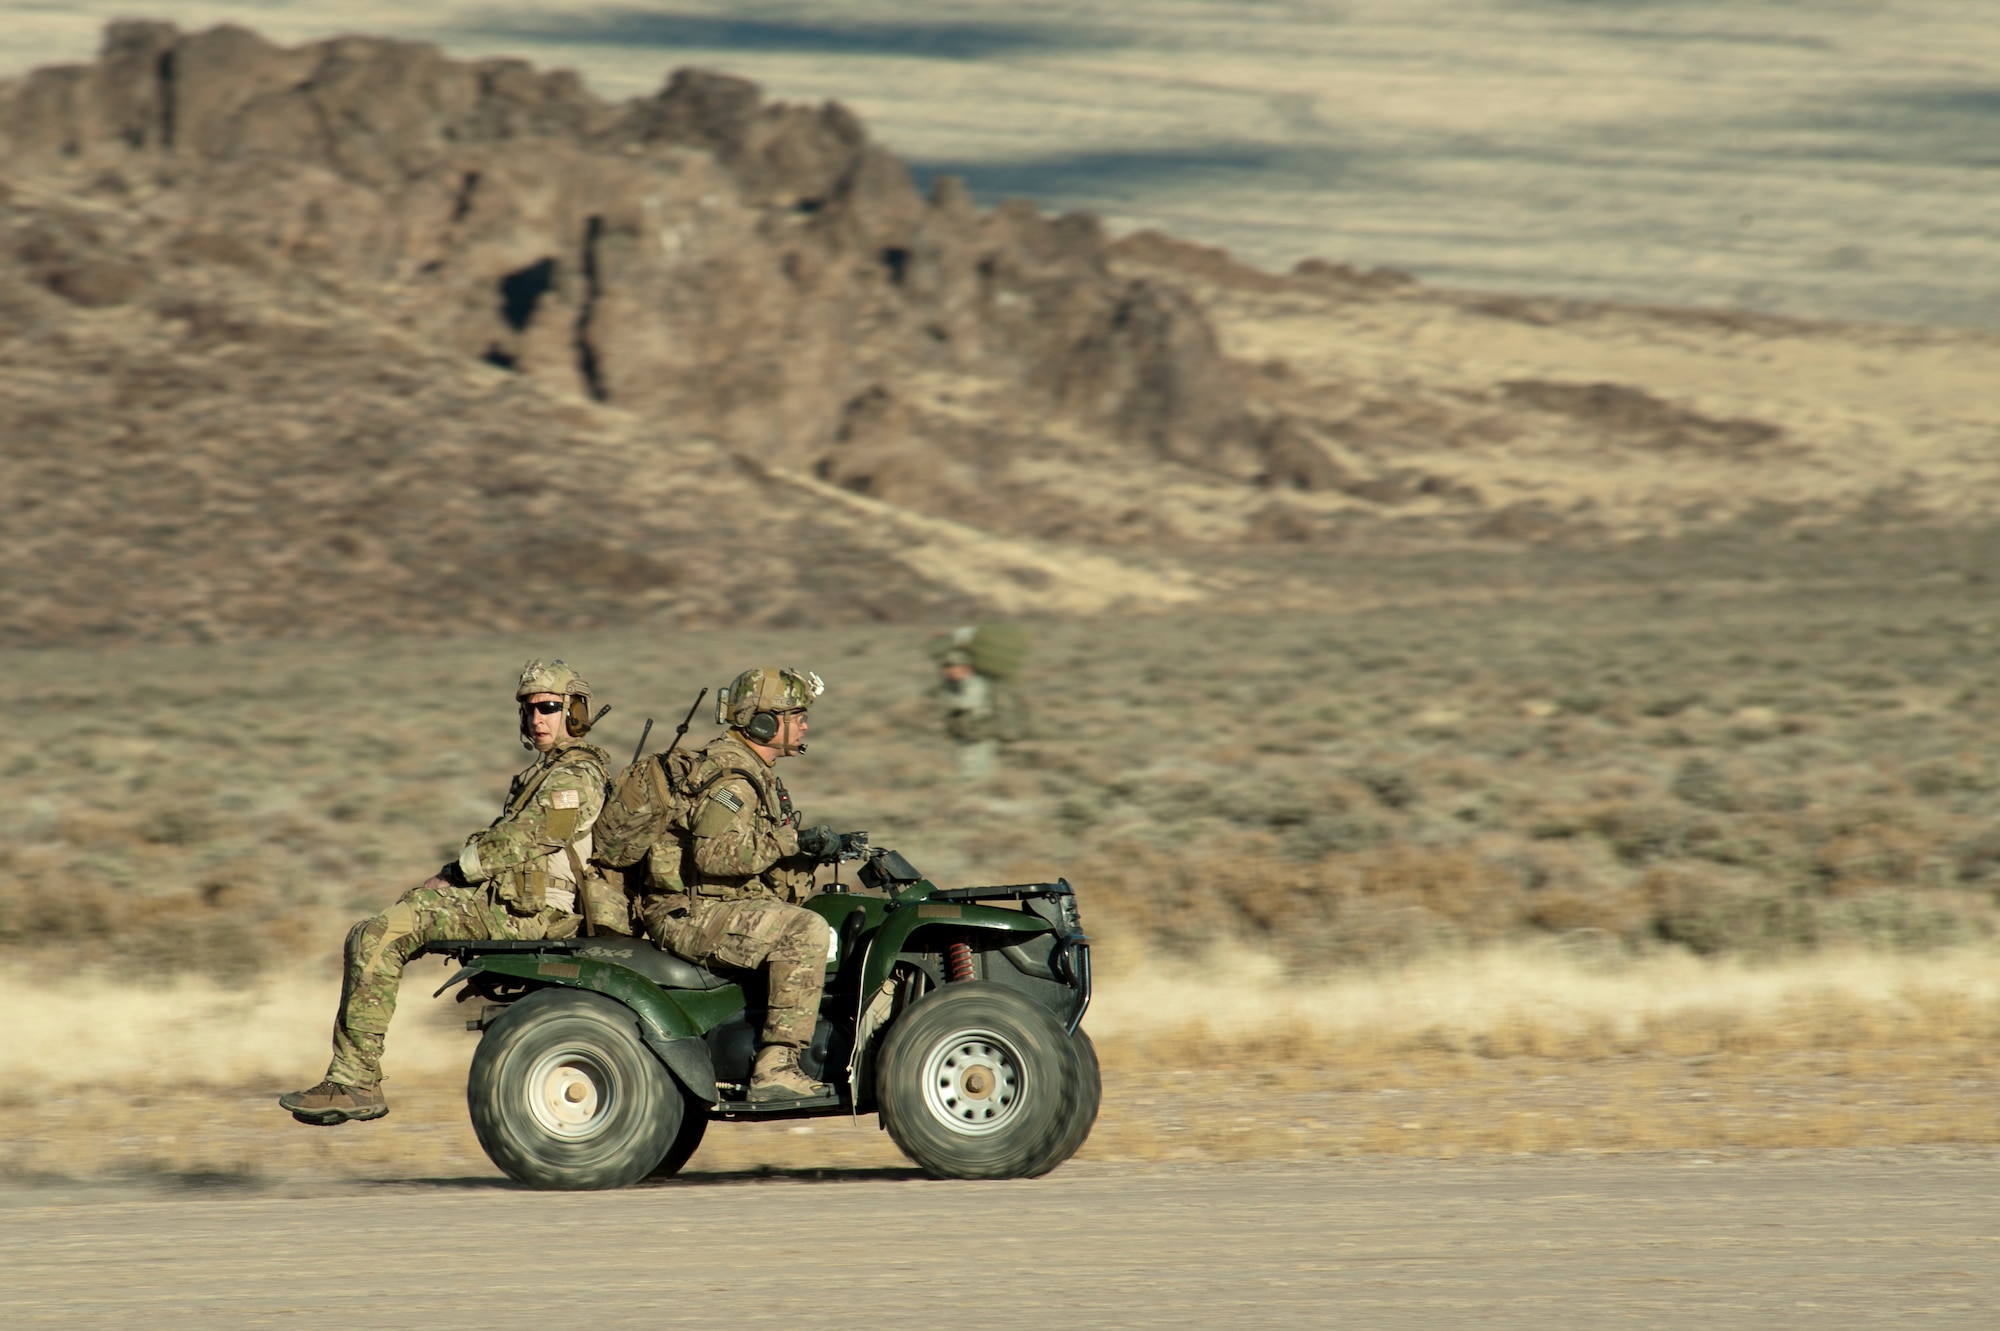 Joint Terminal Attack Controllers drive down a degraded airfield during the U.S. Air Force Weapons School's Joint Forcible Entry Exercise 14B at the Nevada Test and Training Range Dec. 6, 2014. A JTAC’s job is to translate the ground commander's needs into tactical directions over the radio that aircrews can understand. (U.S. Air Force photo by Senior Airman Timothy Young)